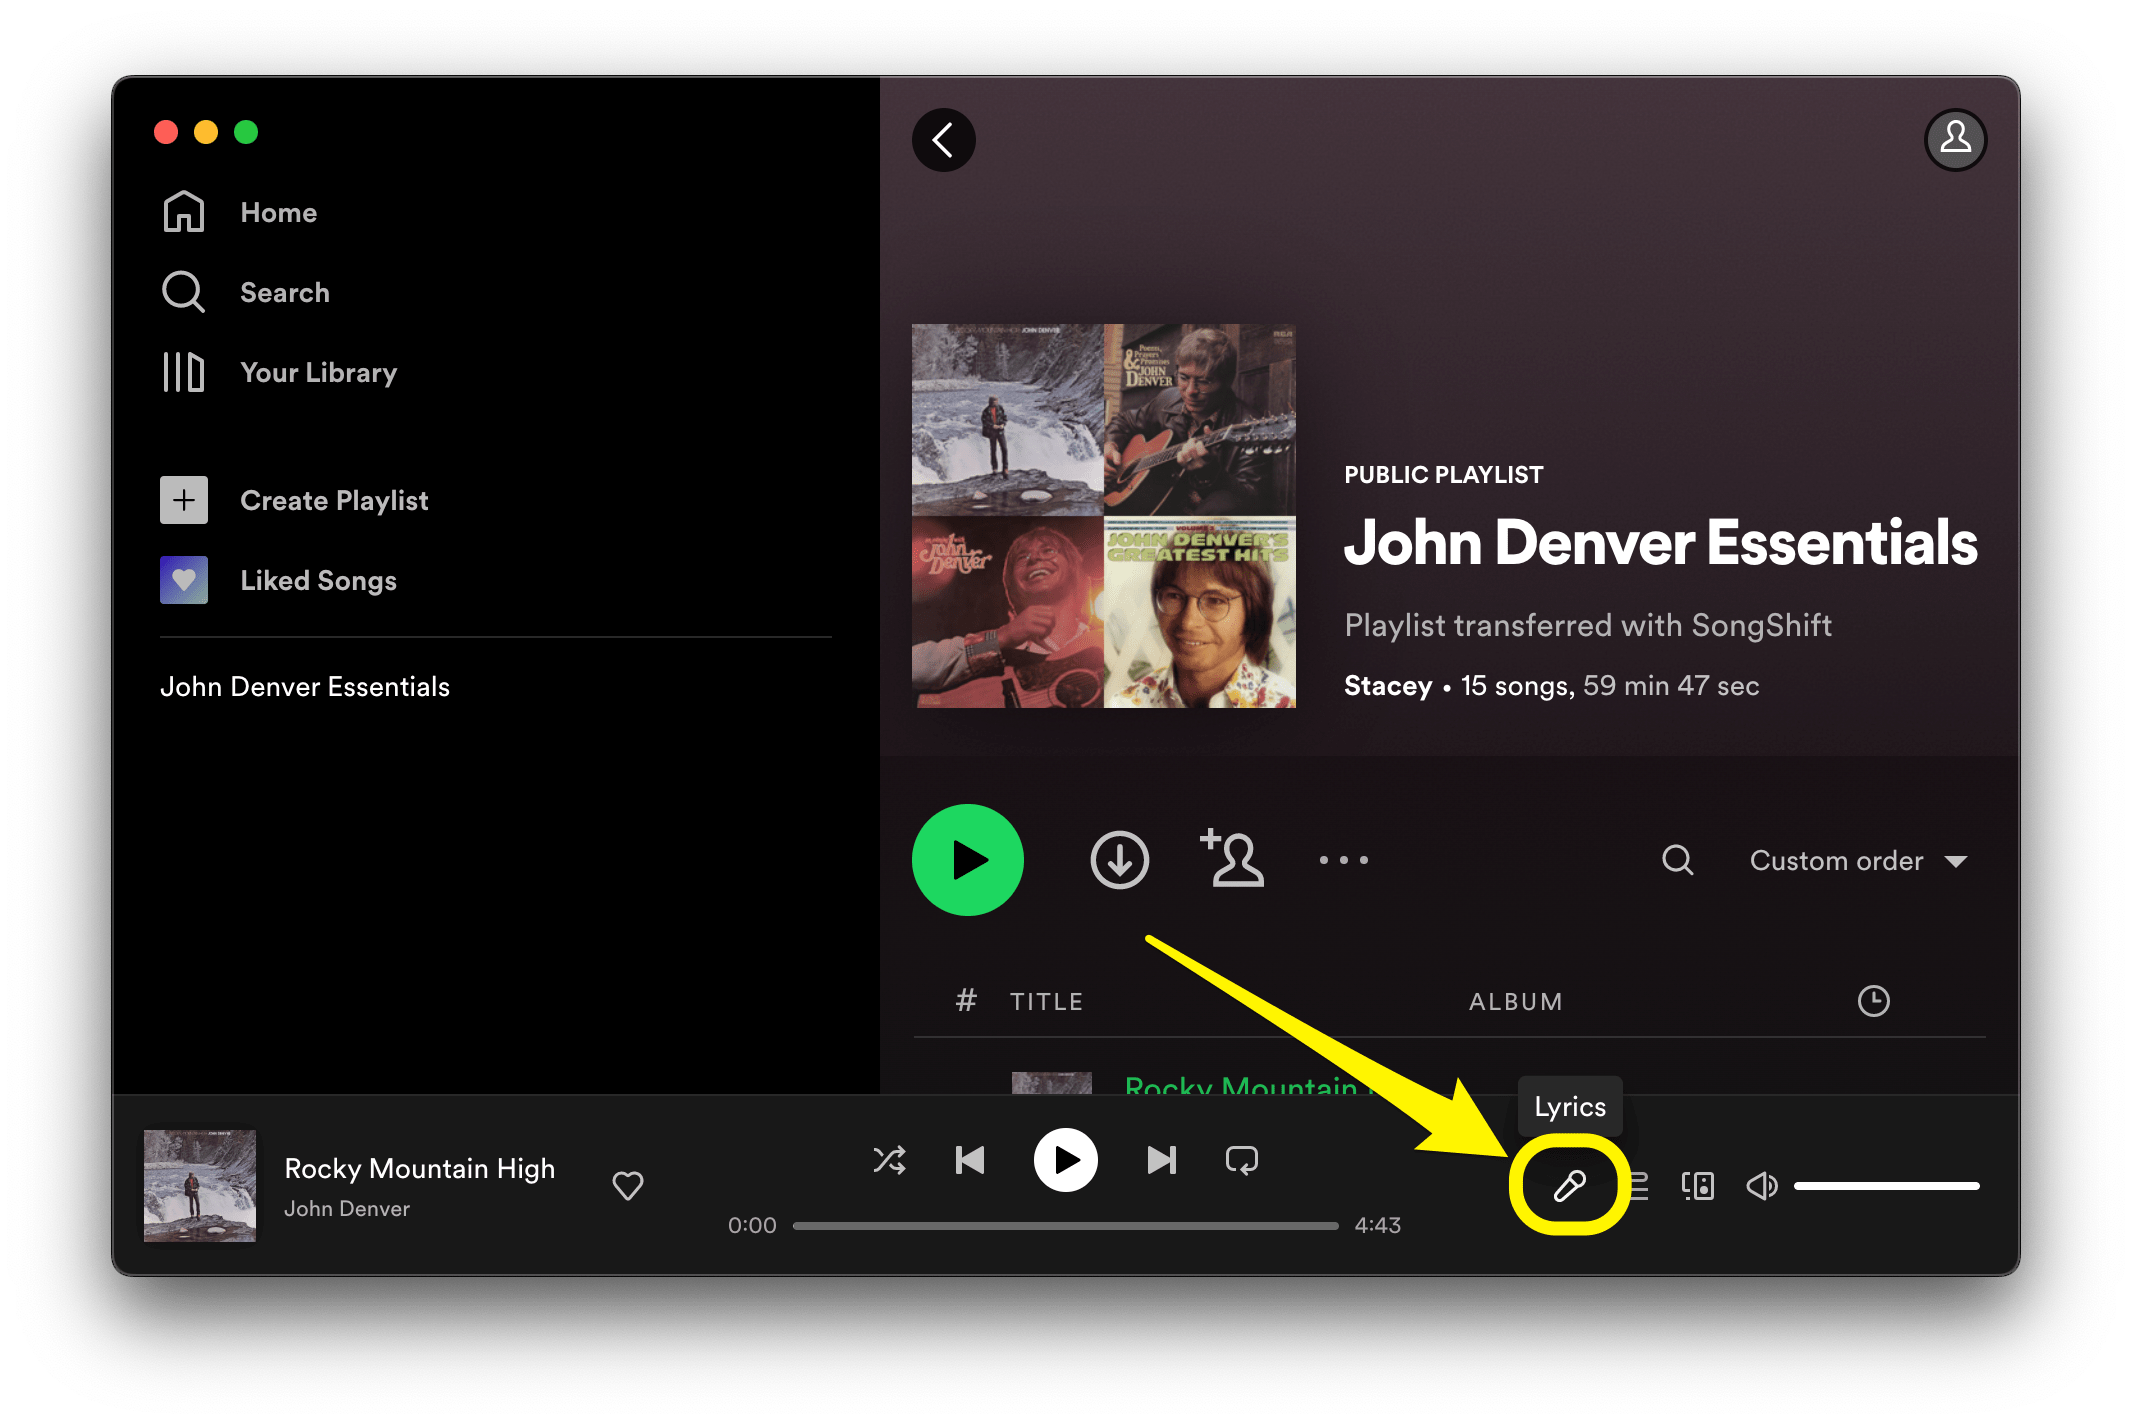 How to see Spotify Lyrics on IOS